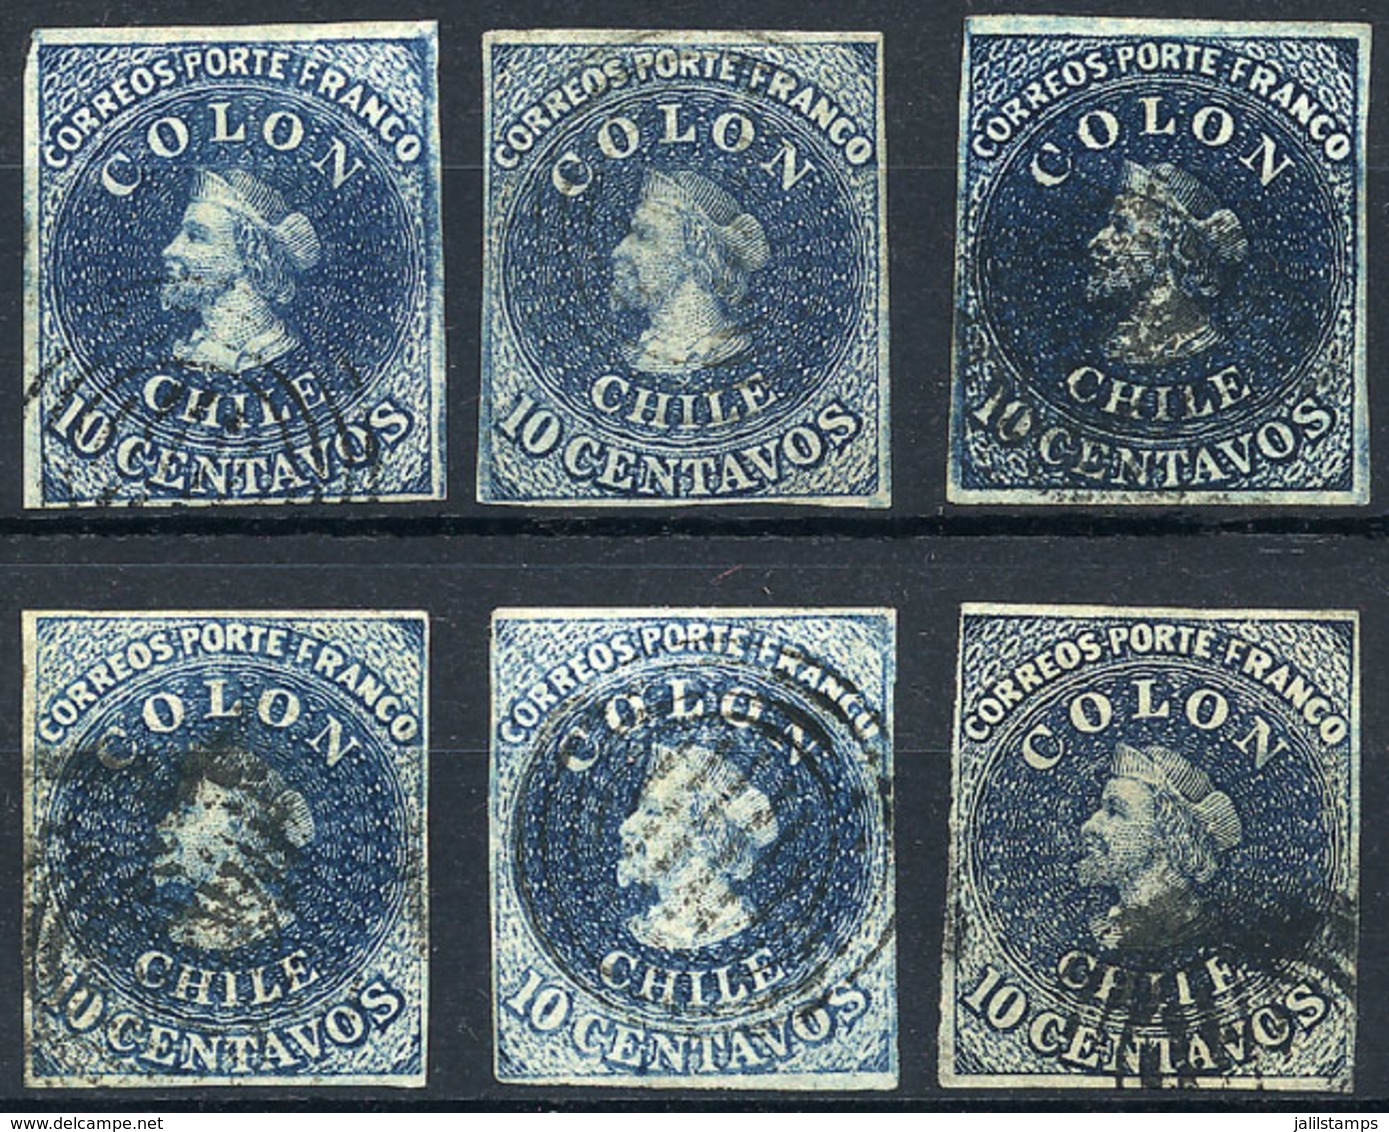 CHILE: Yvert 6 (Sc.10) And Its Color Varieties, 1856/66 10c. Santiago Print (Estancos), 6 Examples Of 4 Margins, Range O - Chile